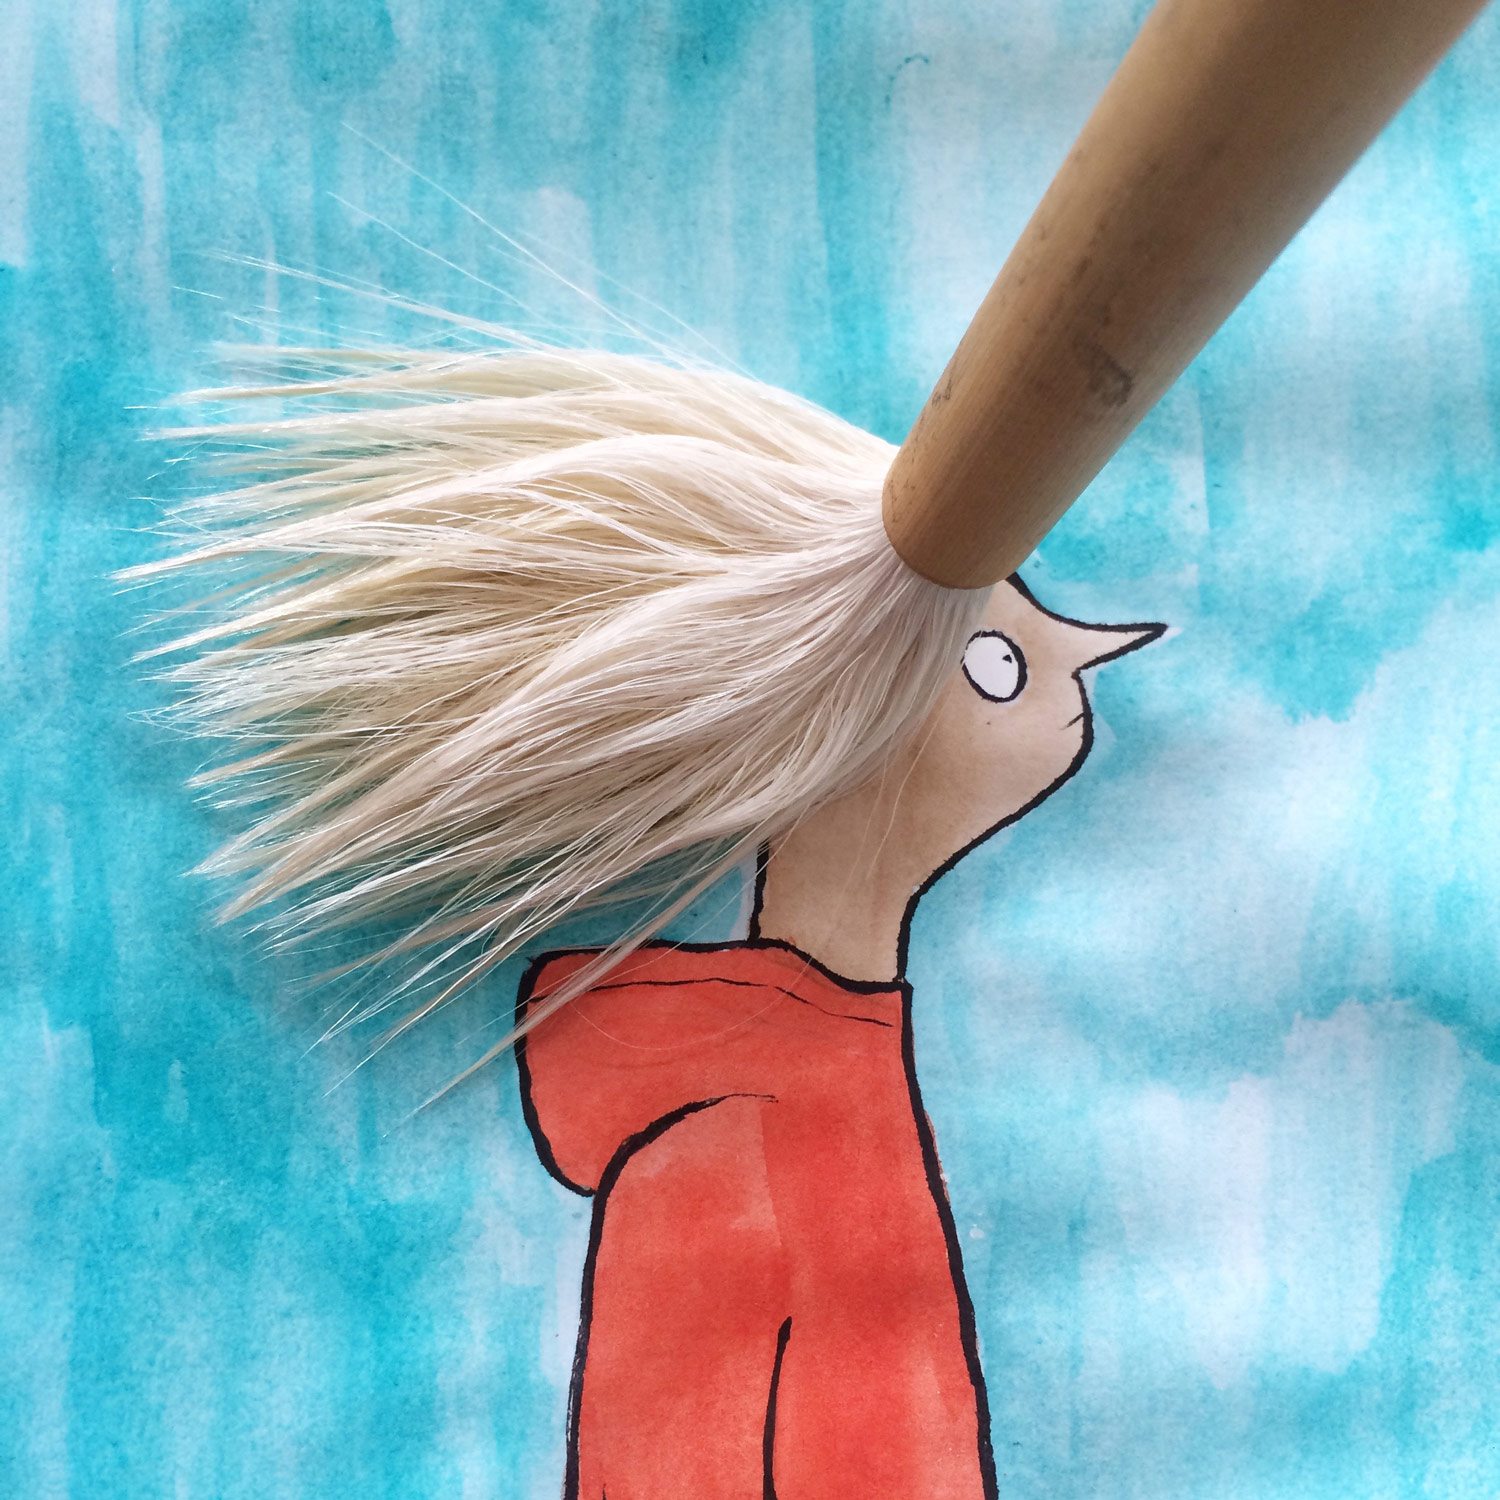 When the Wind Blows: character with a paint brush for hair